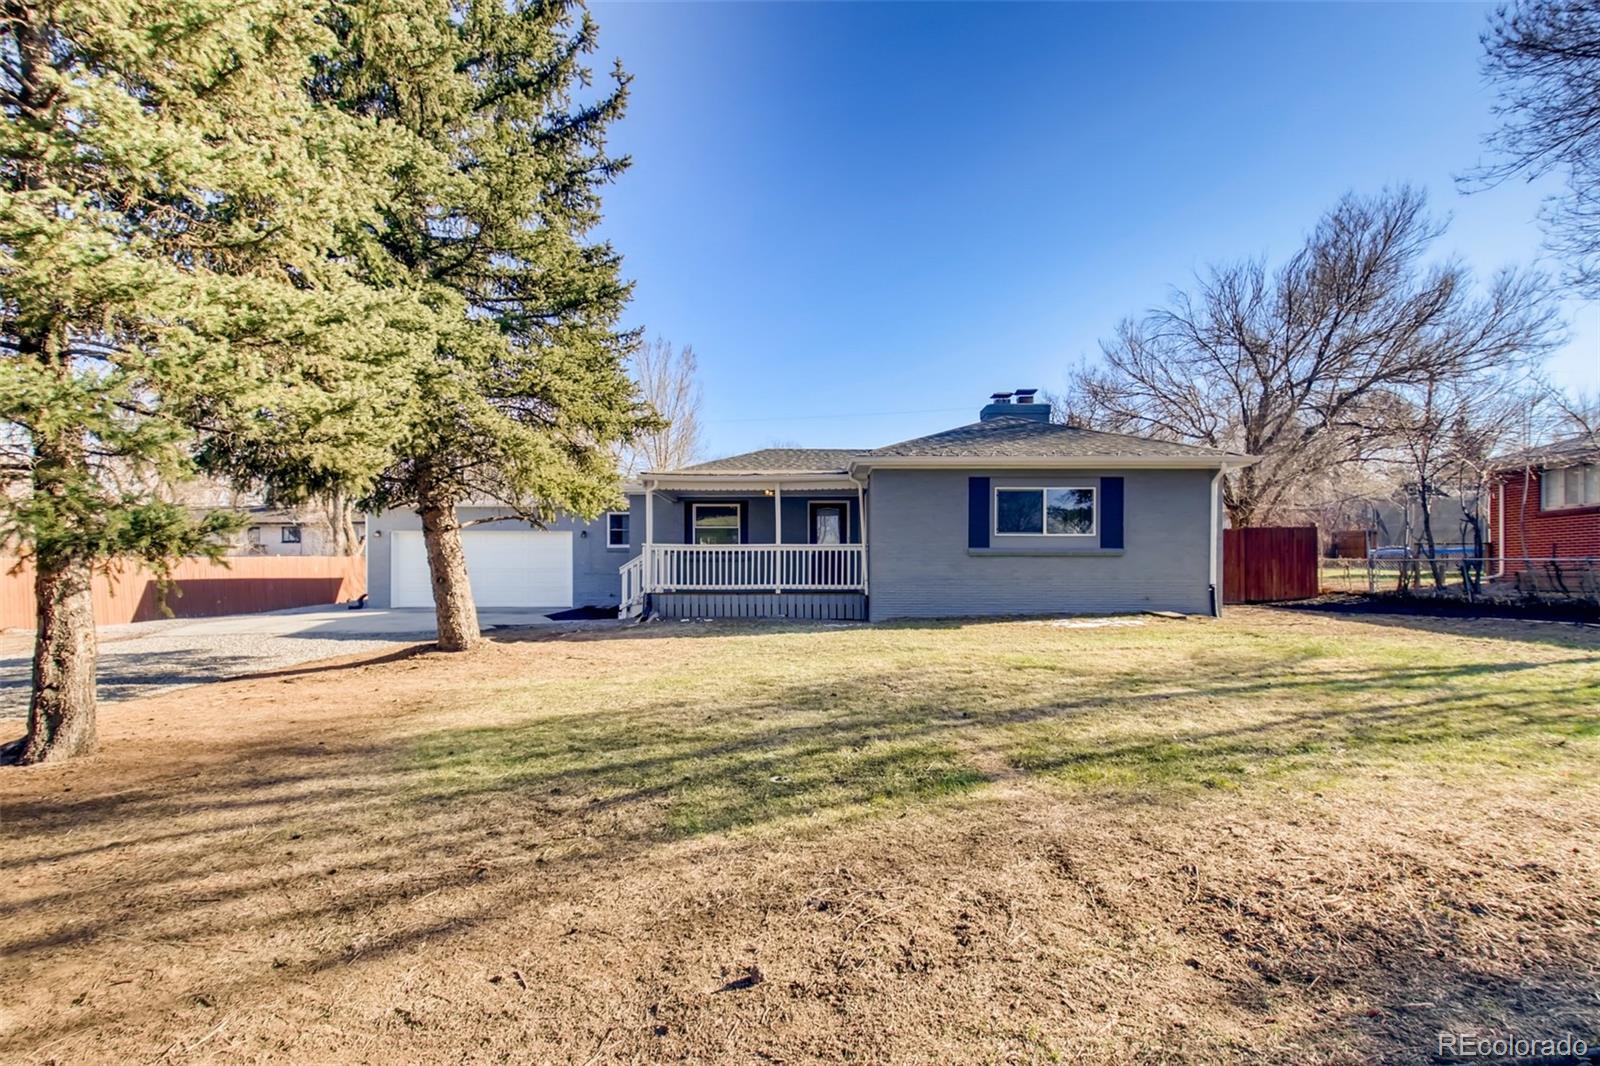 Report Image for 6450 W 6th Avenue,Lakewood, Colorado